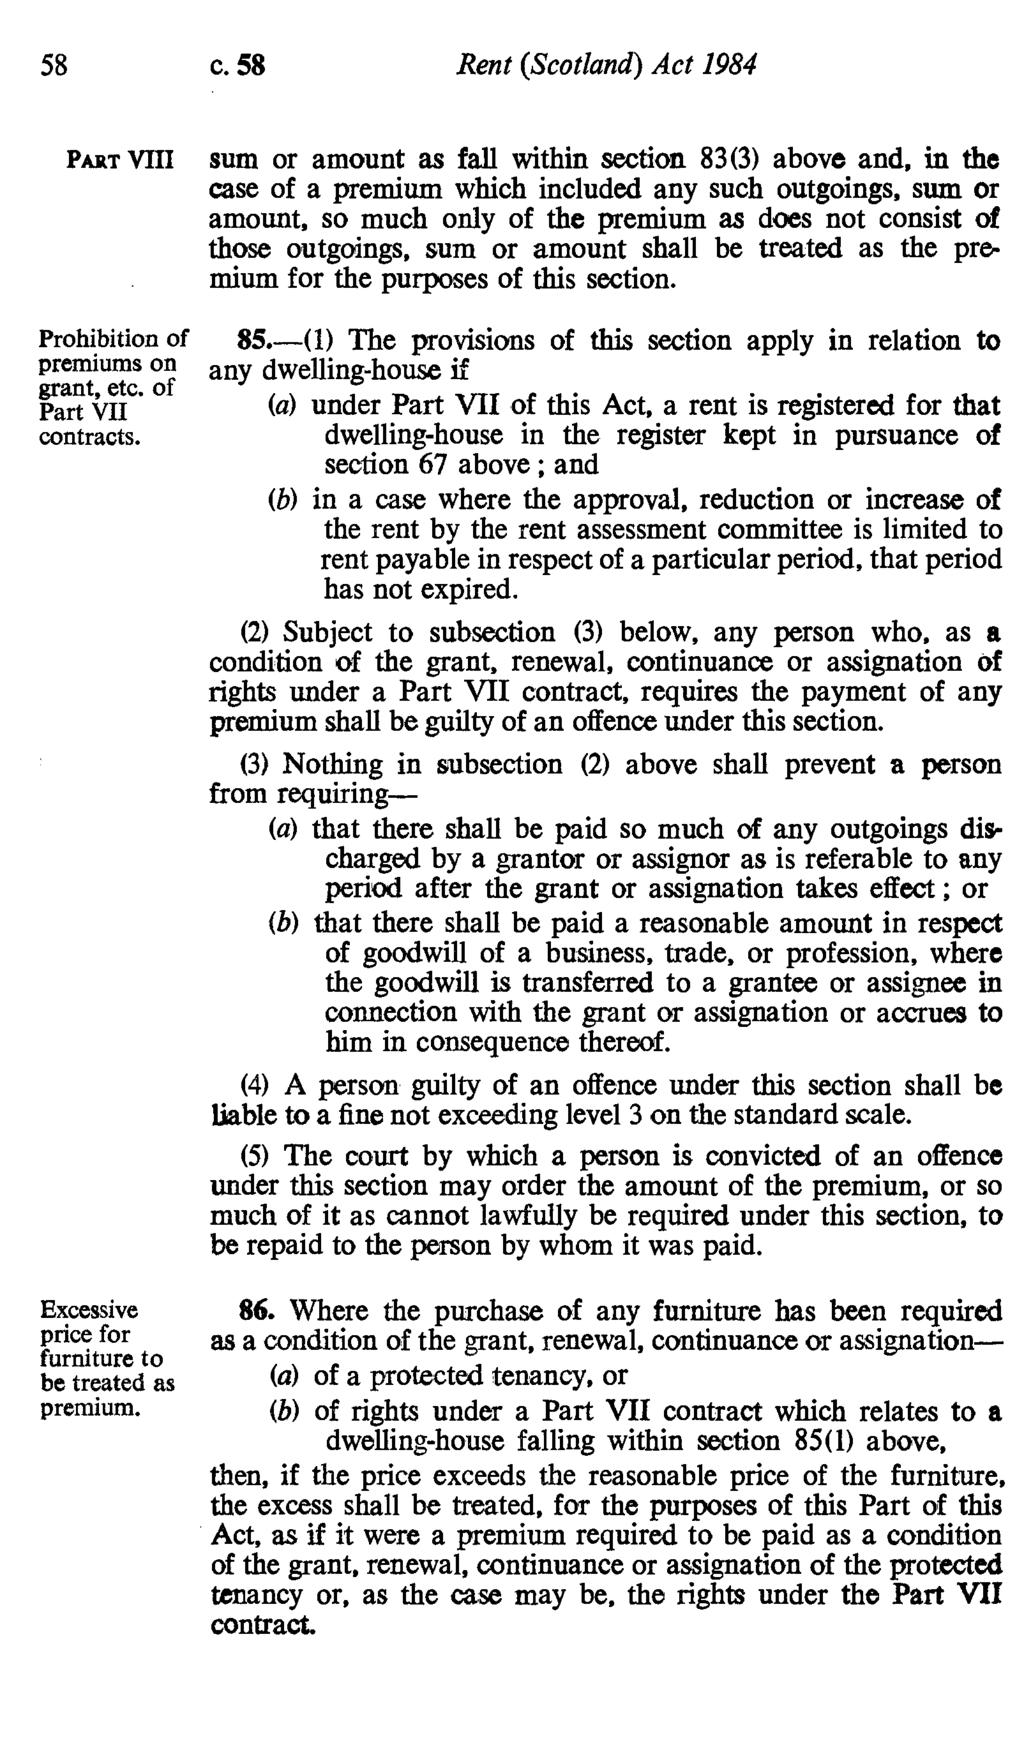 58 c. 58 Rent (Scotland) Act 1984 PART VIII Prohibition of premiums on grant, etc. of Part VII contracts. Excessive price for furniture to be treated as premium.